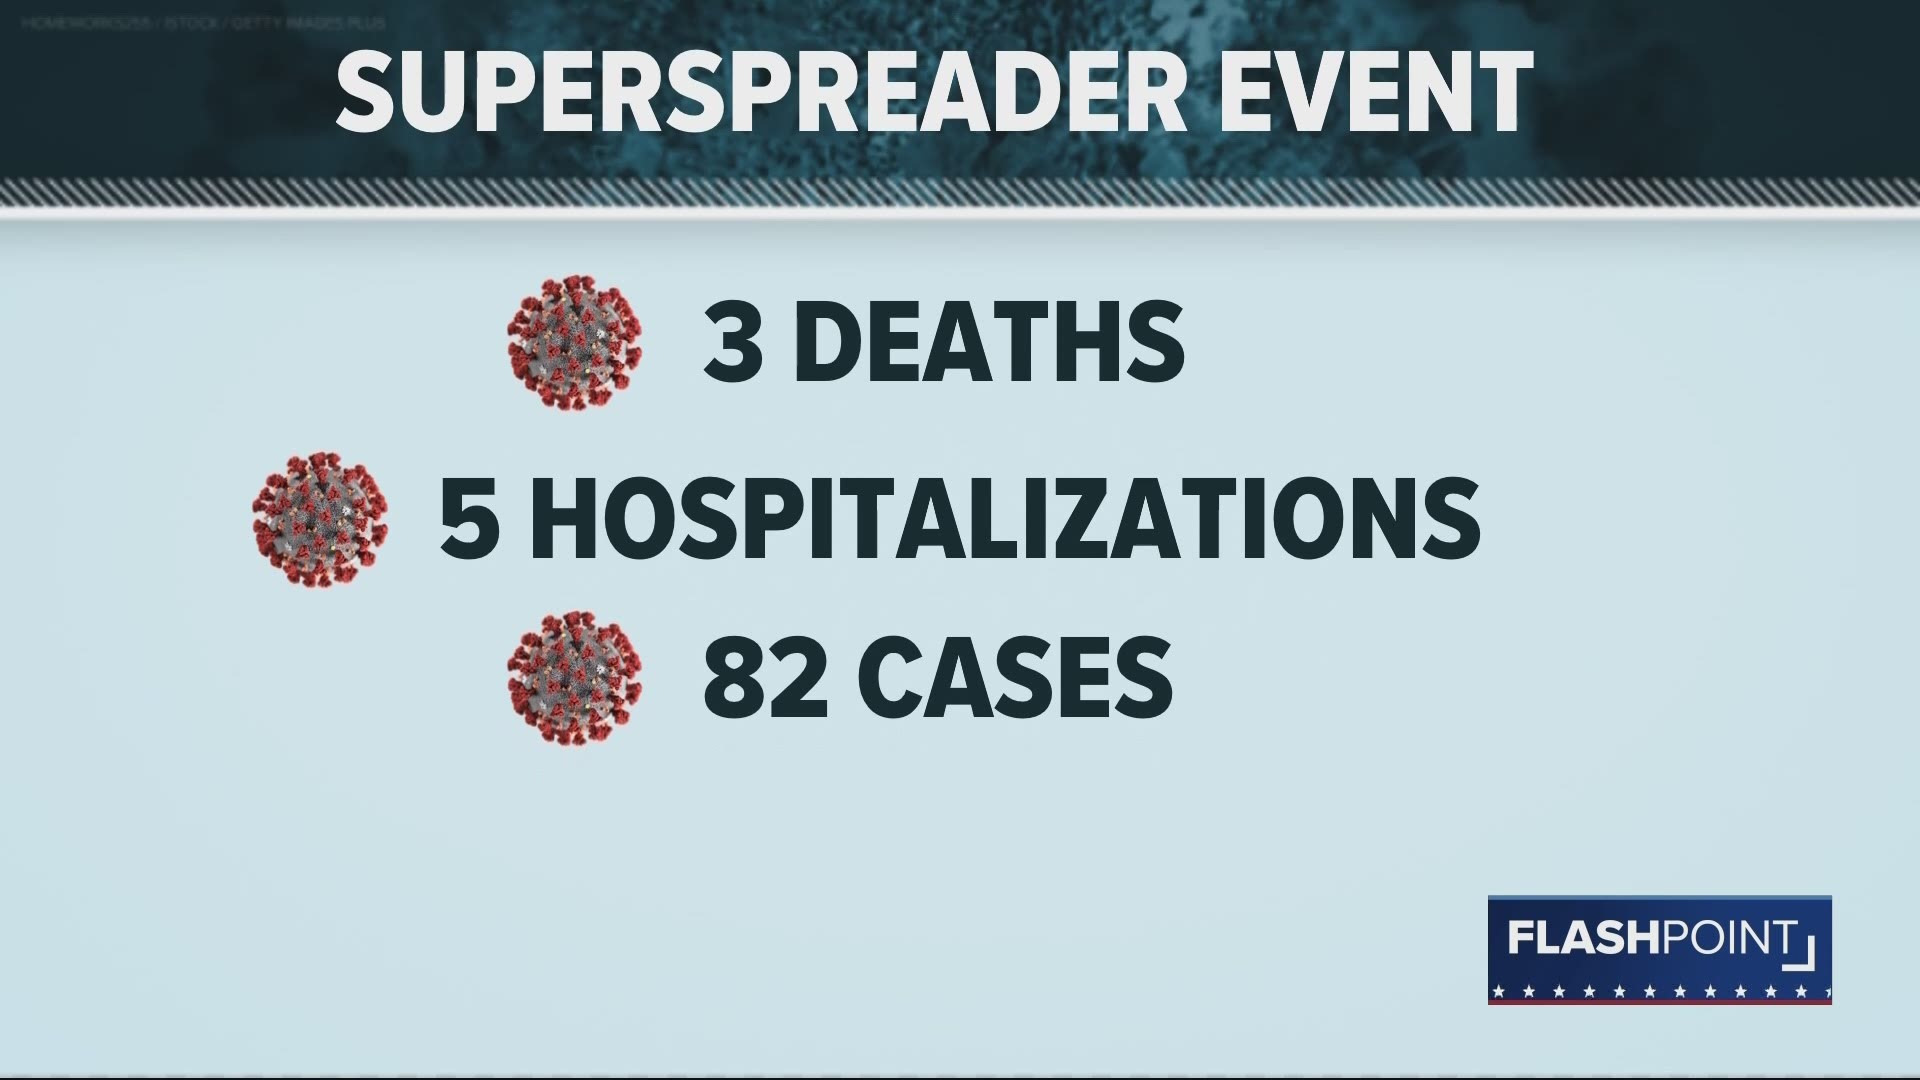 Flashpoint 10/25: Discuss how the leaders and officials should be encouraging safety during a pandemic.